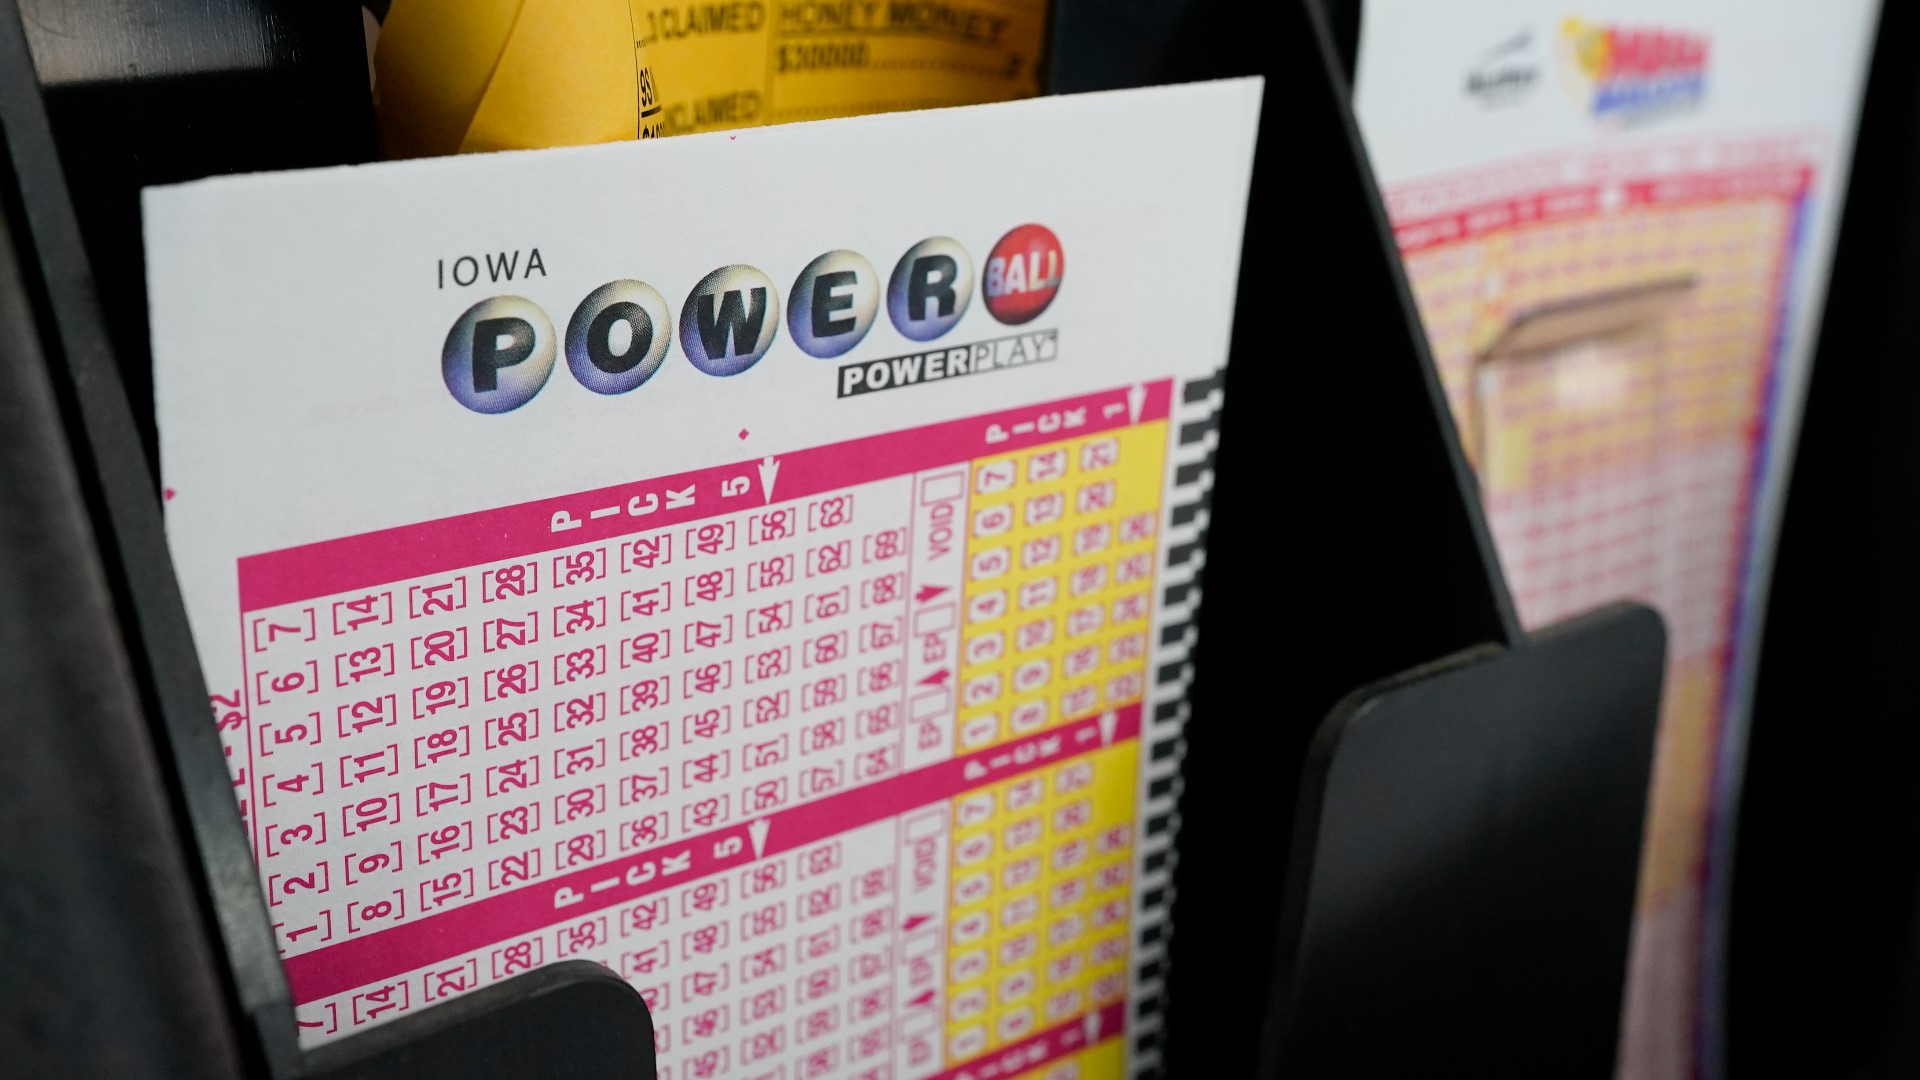 The winner is splitting the prize with another winner in Wisconsin. The California ticket has a prize of $315 million.